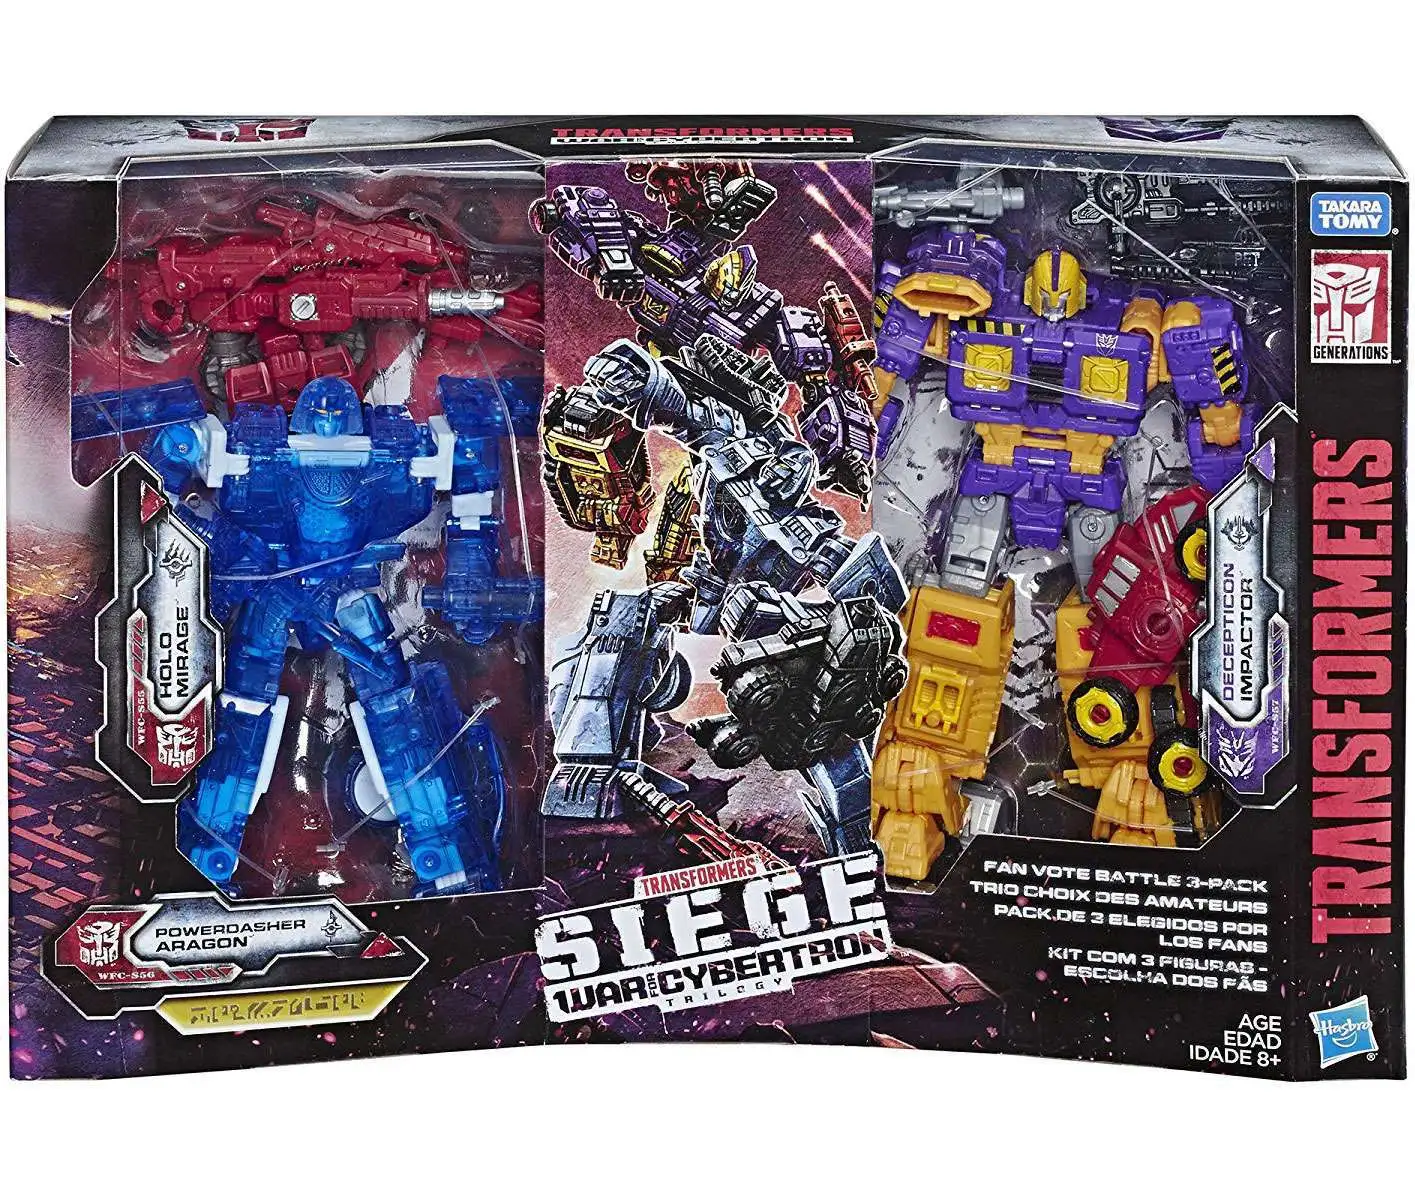 Hasbro Deluxe Transformers Siege War For Cybertron Trilogy Autobot MIRAGE 